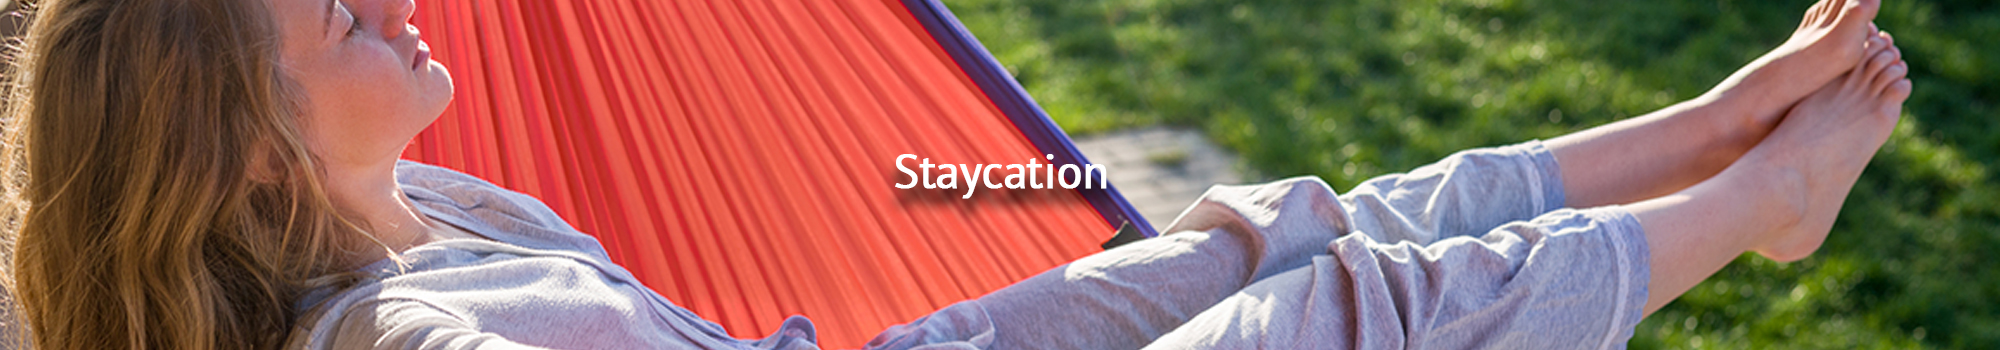 homepage-staycation